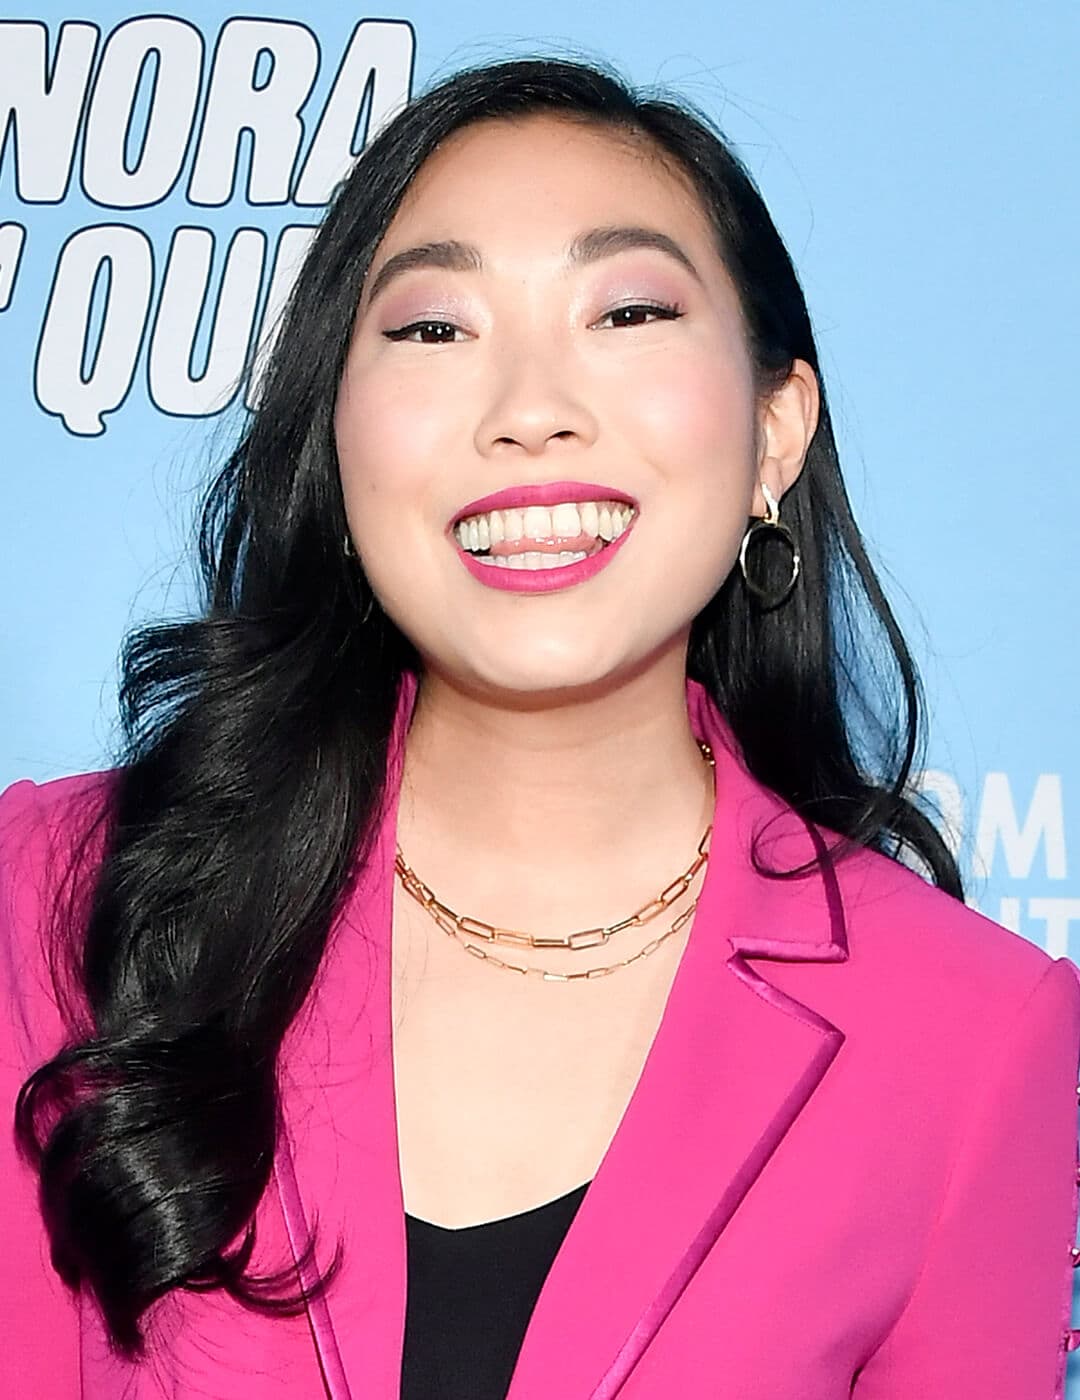 Cheerful Awkwafina rocking a pink suit, black v-nect top, gold necklaces, and wavy hairstyle on the red carpet